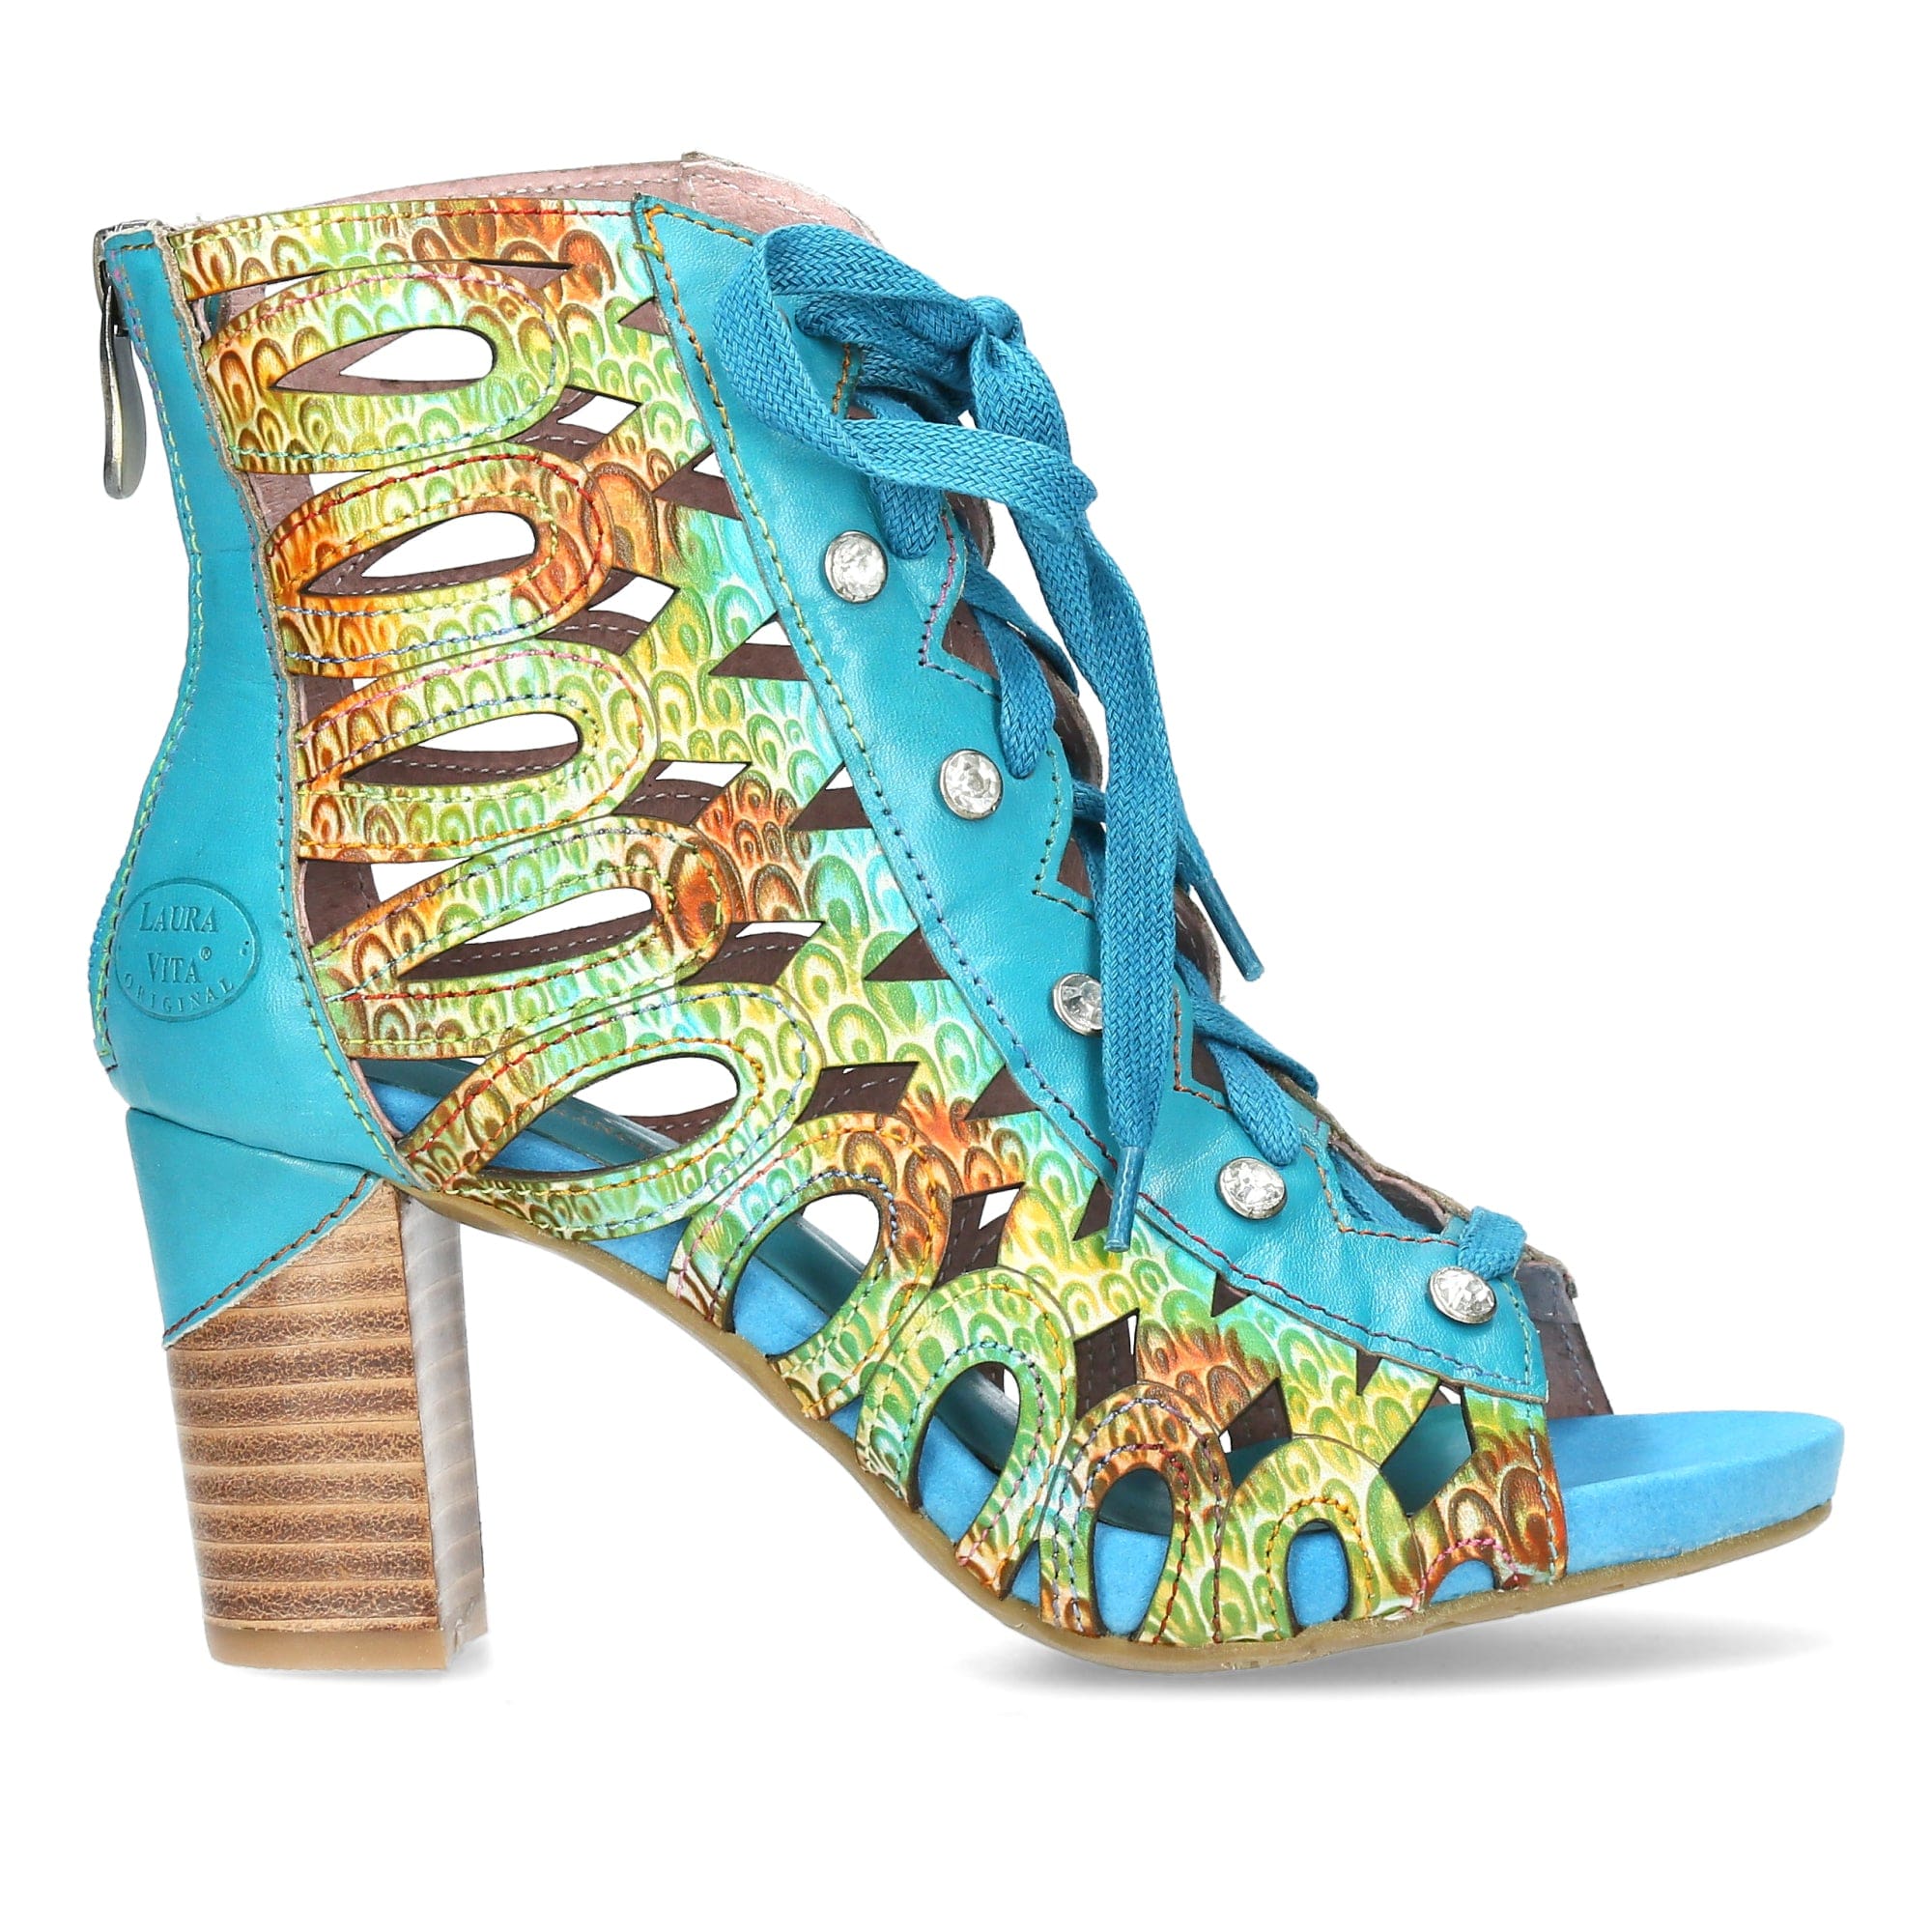 BECRNIEO 73 shoes - 35 / Turquoise - Sandal